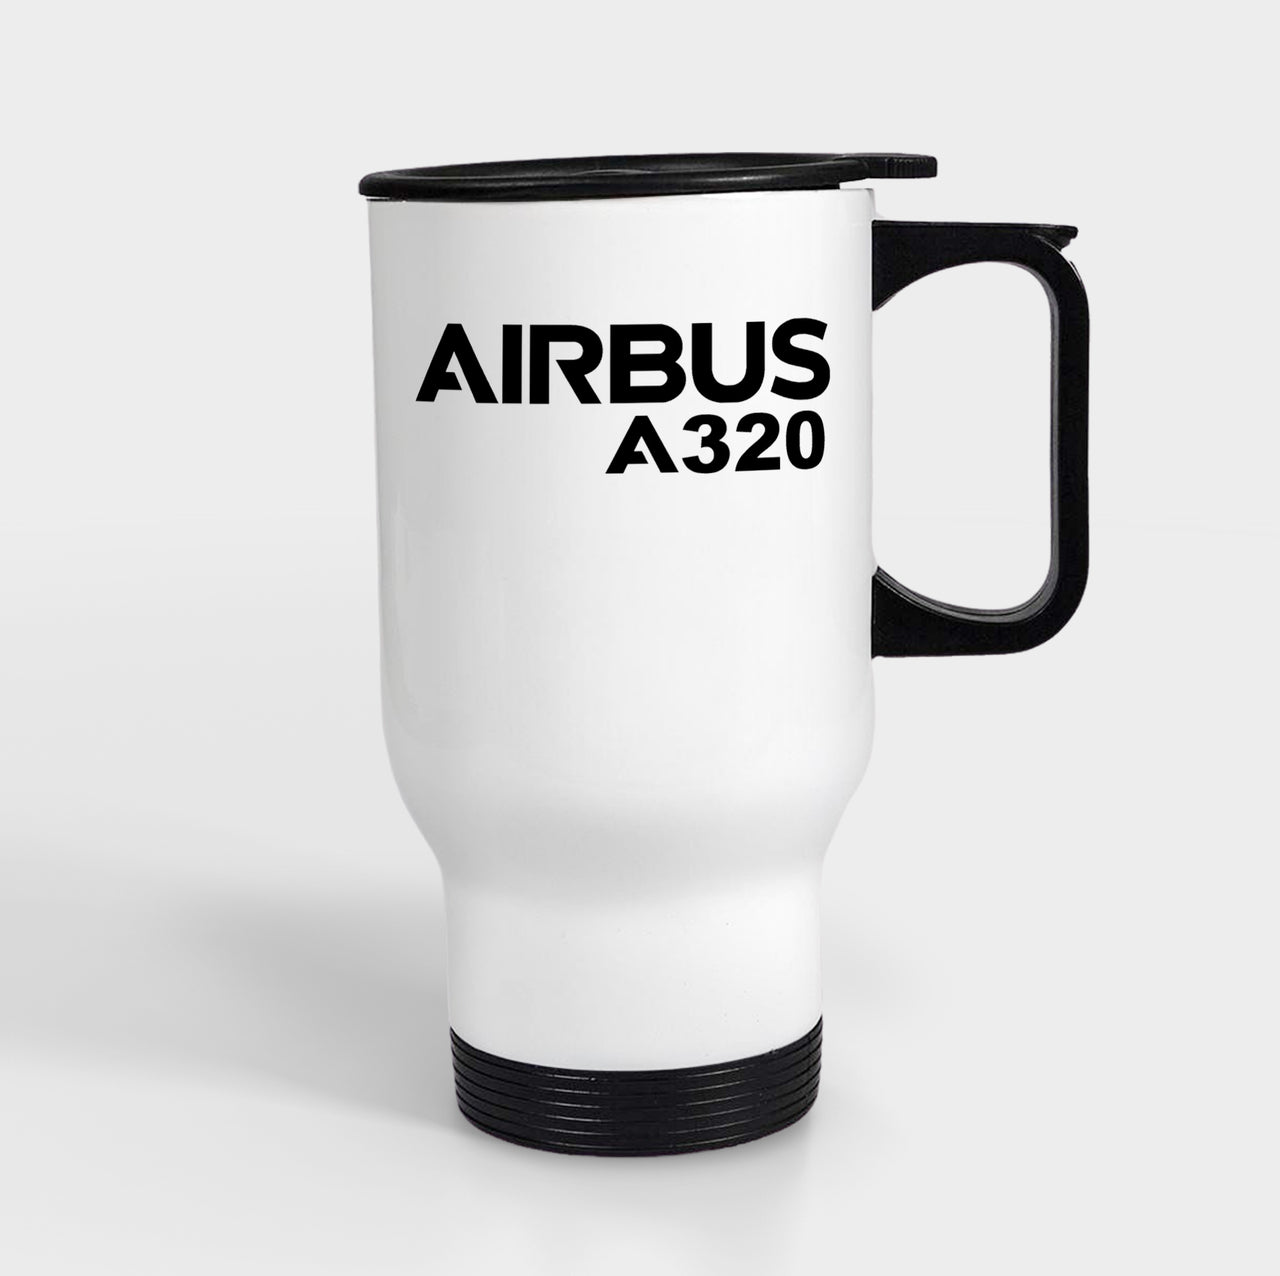 Airbus A320 & Text Designed Travel Mugs (With Holder)